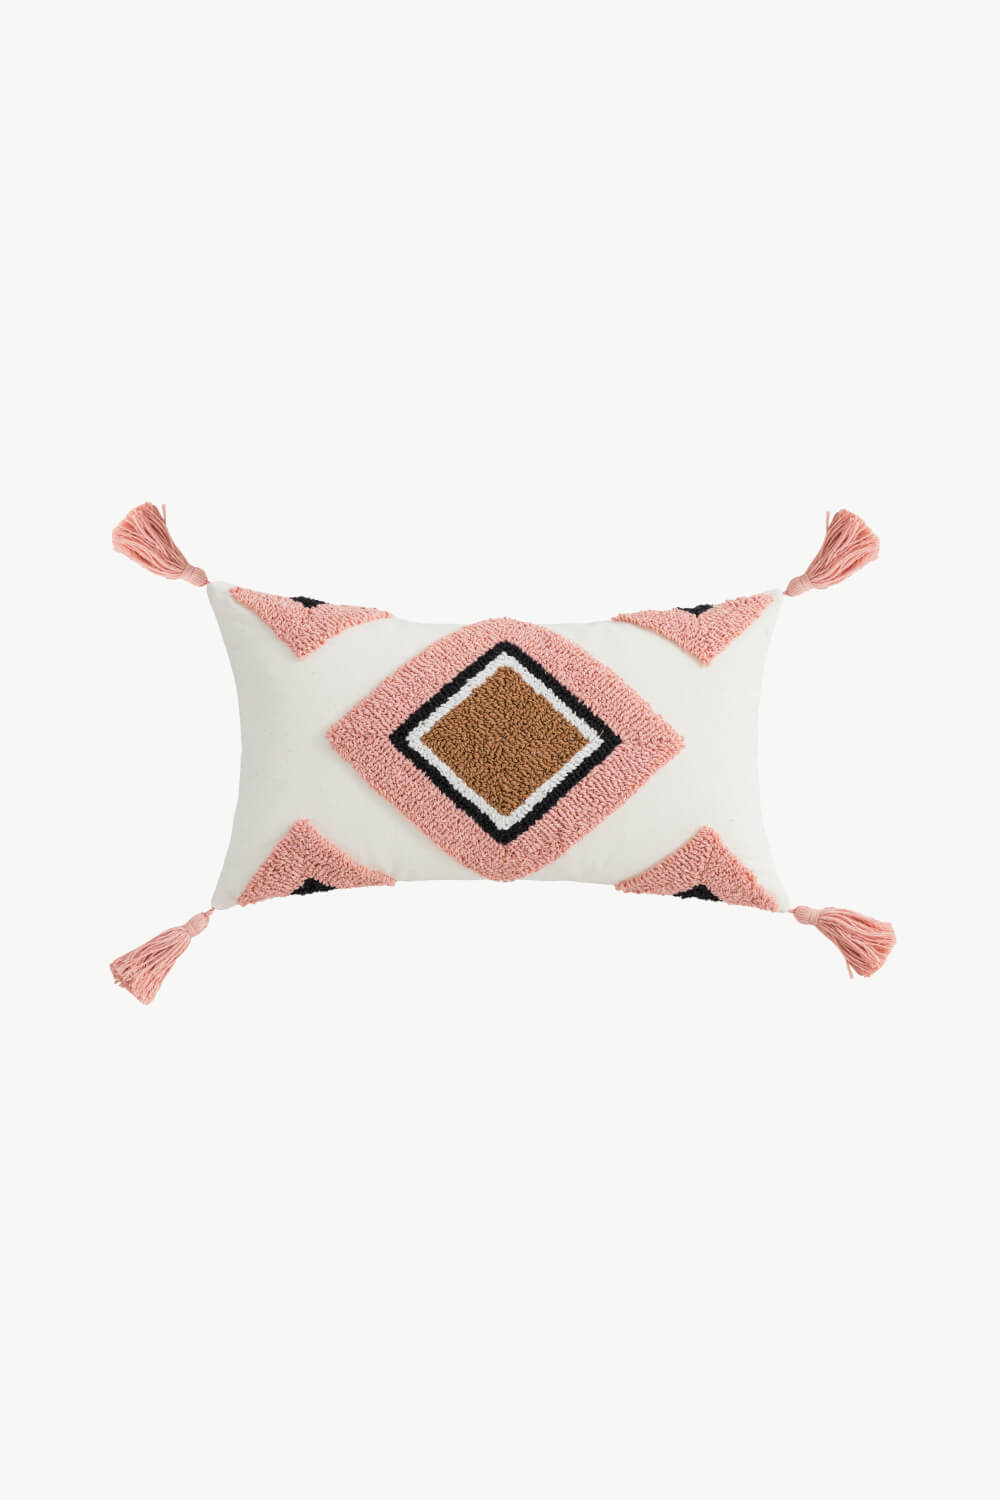 Geometric Graphic Tassel Decorative Throw Pillow Case-SHIPS DIRECTLY TO YOU!